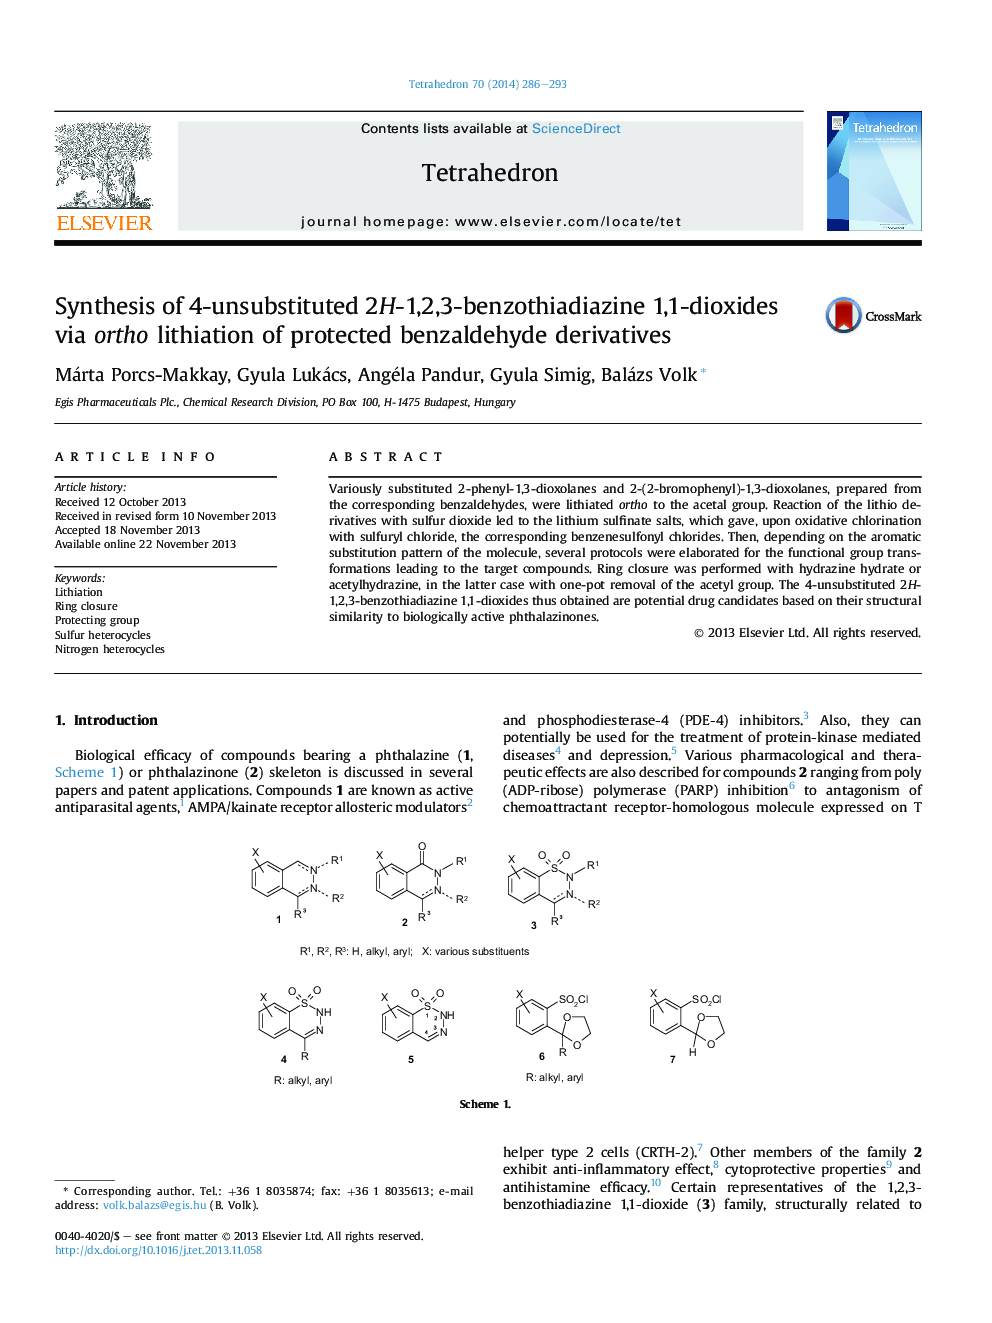 Synthesis of 4-unsubstituted 2H-1,2,3-benzothiadiazine 1,1-dioxides via ortho lithiation of protected benzaldehyde derivatives